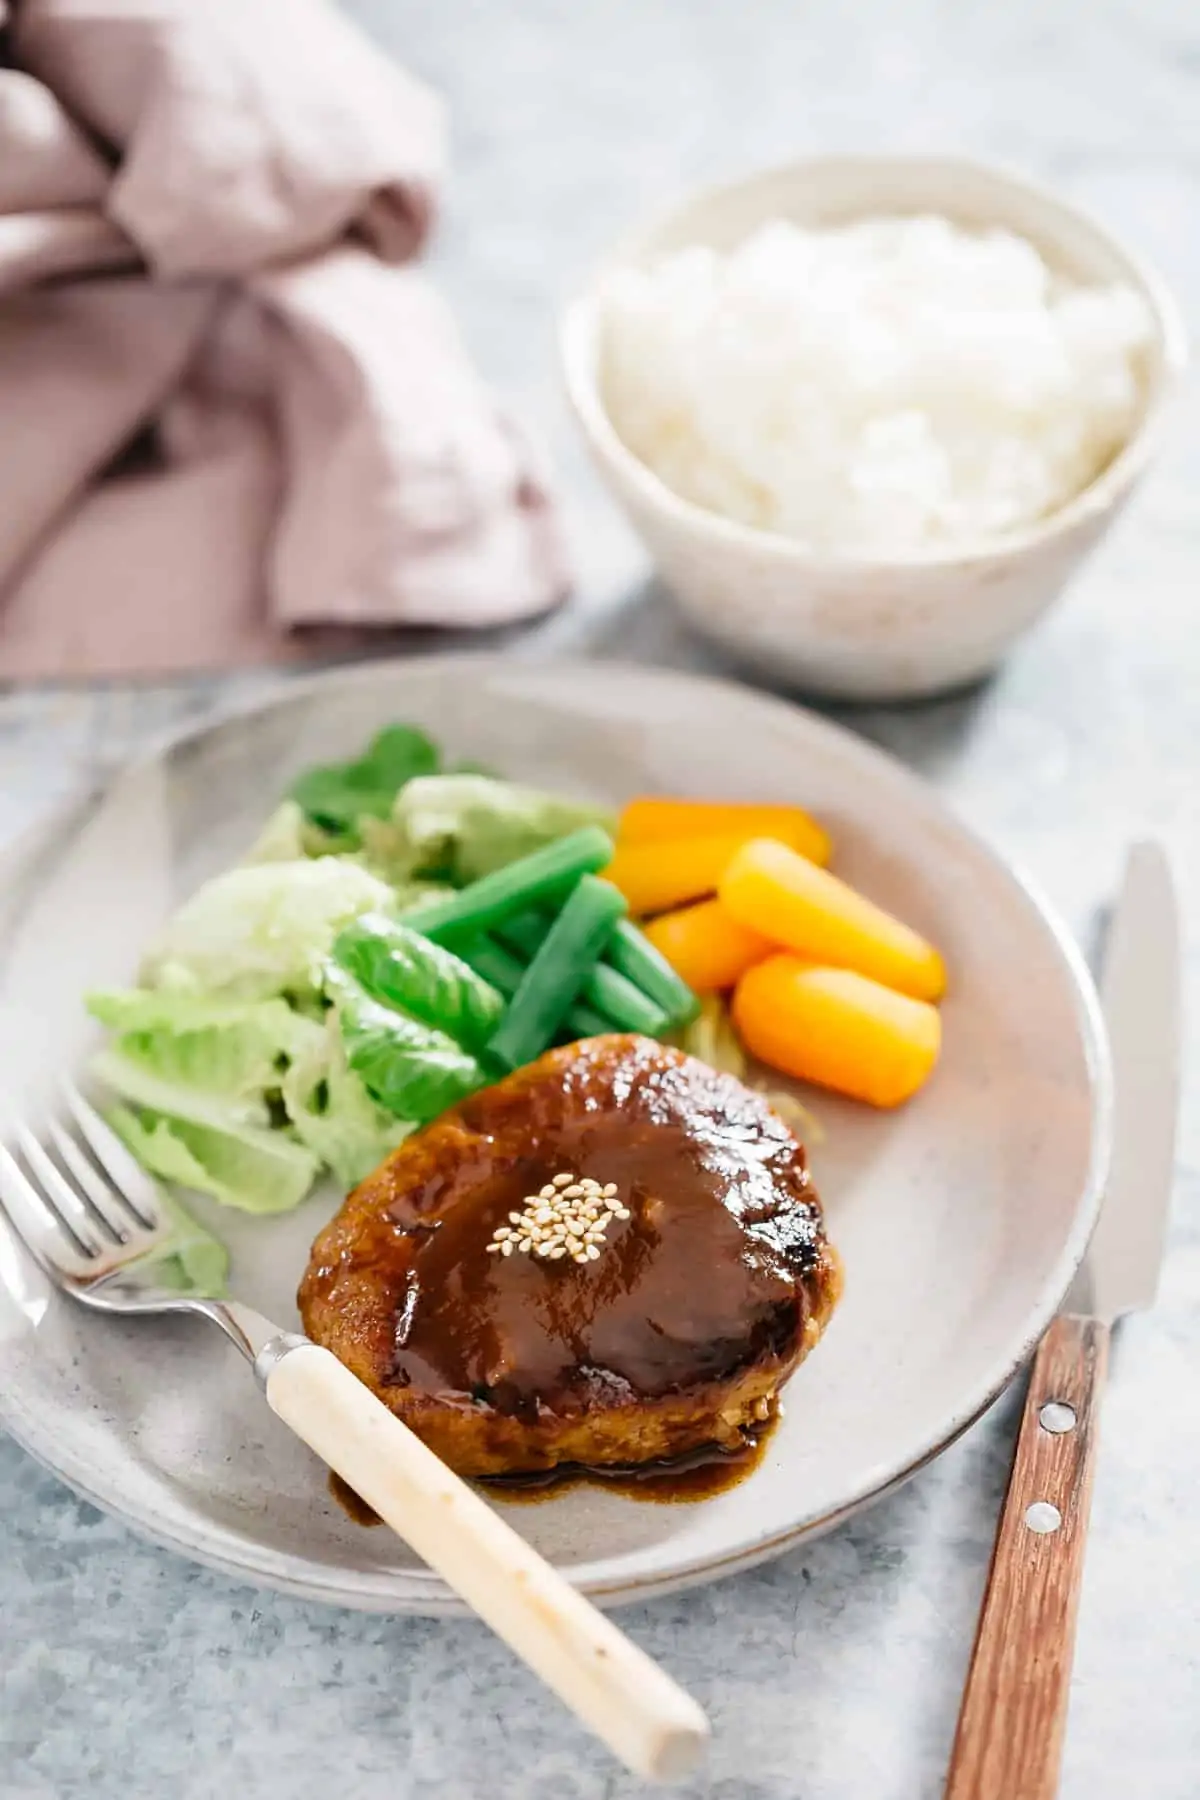 A Japanese hamburger steak served on a round plate with green salad veggies and carrots and green beans.